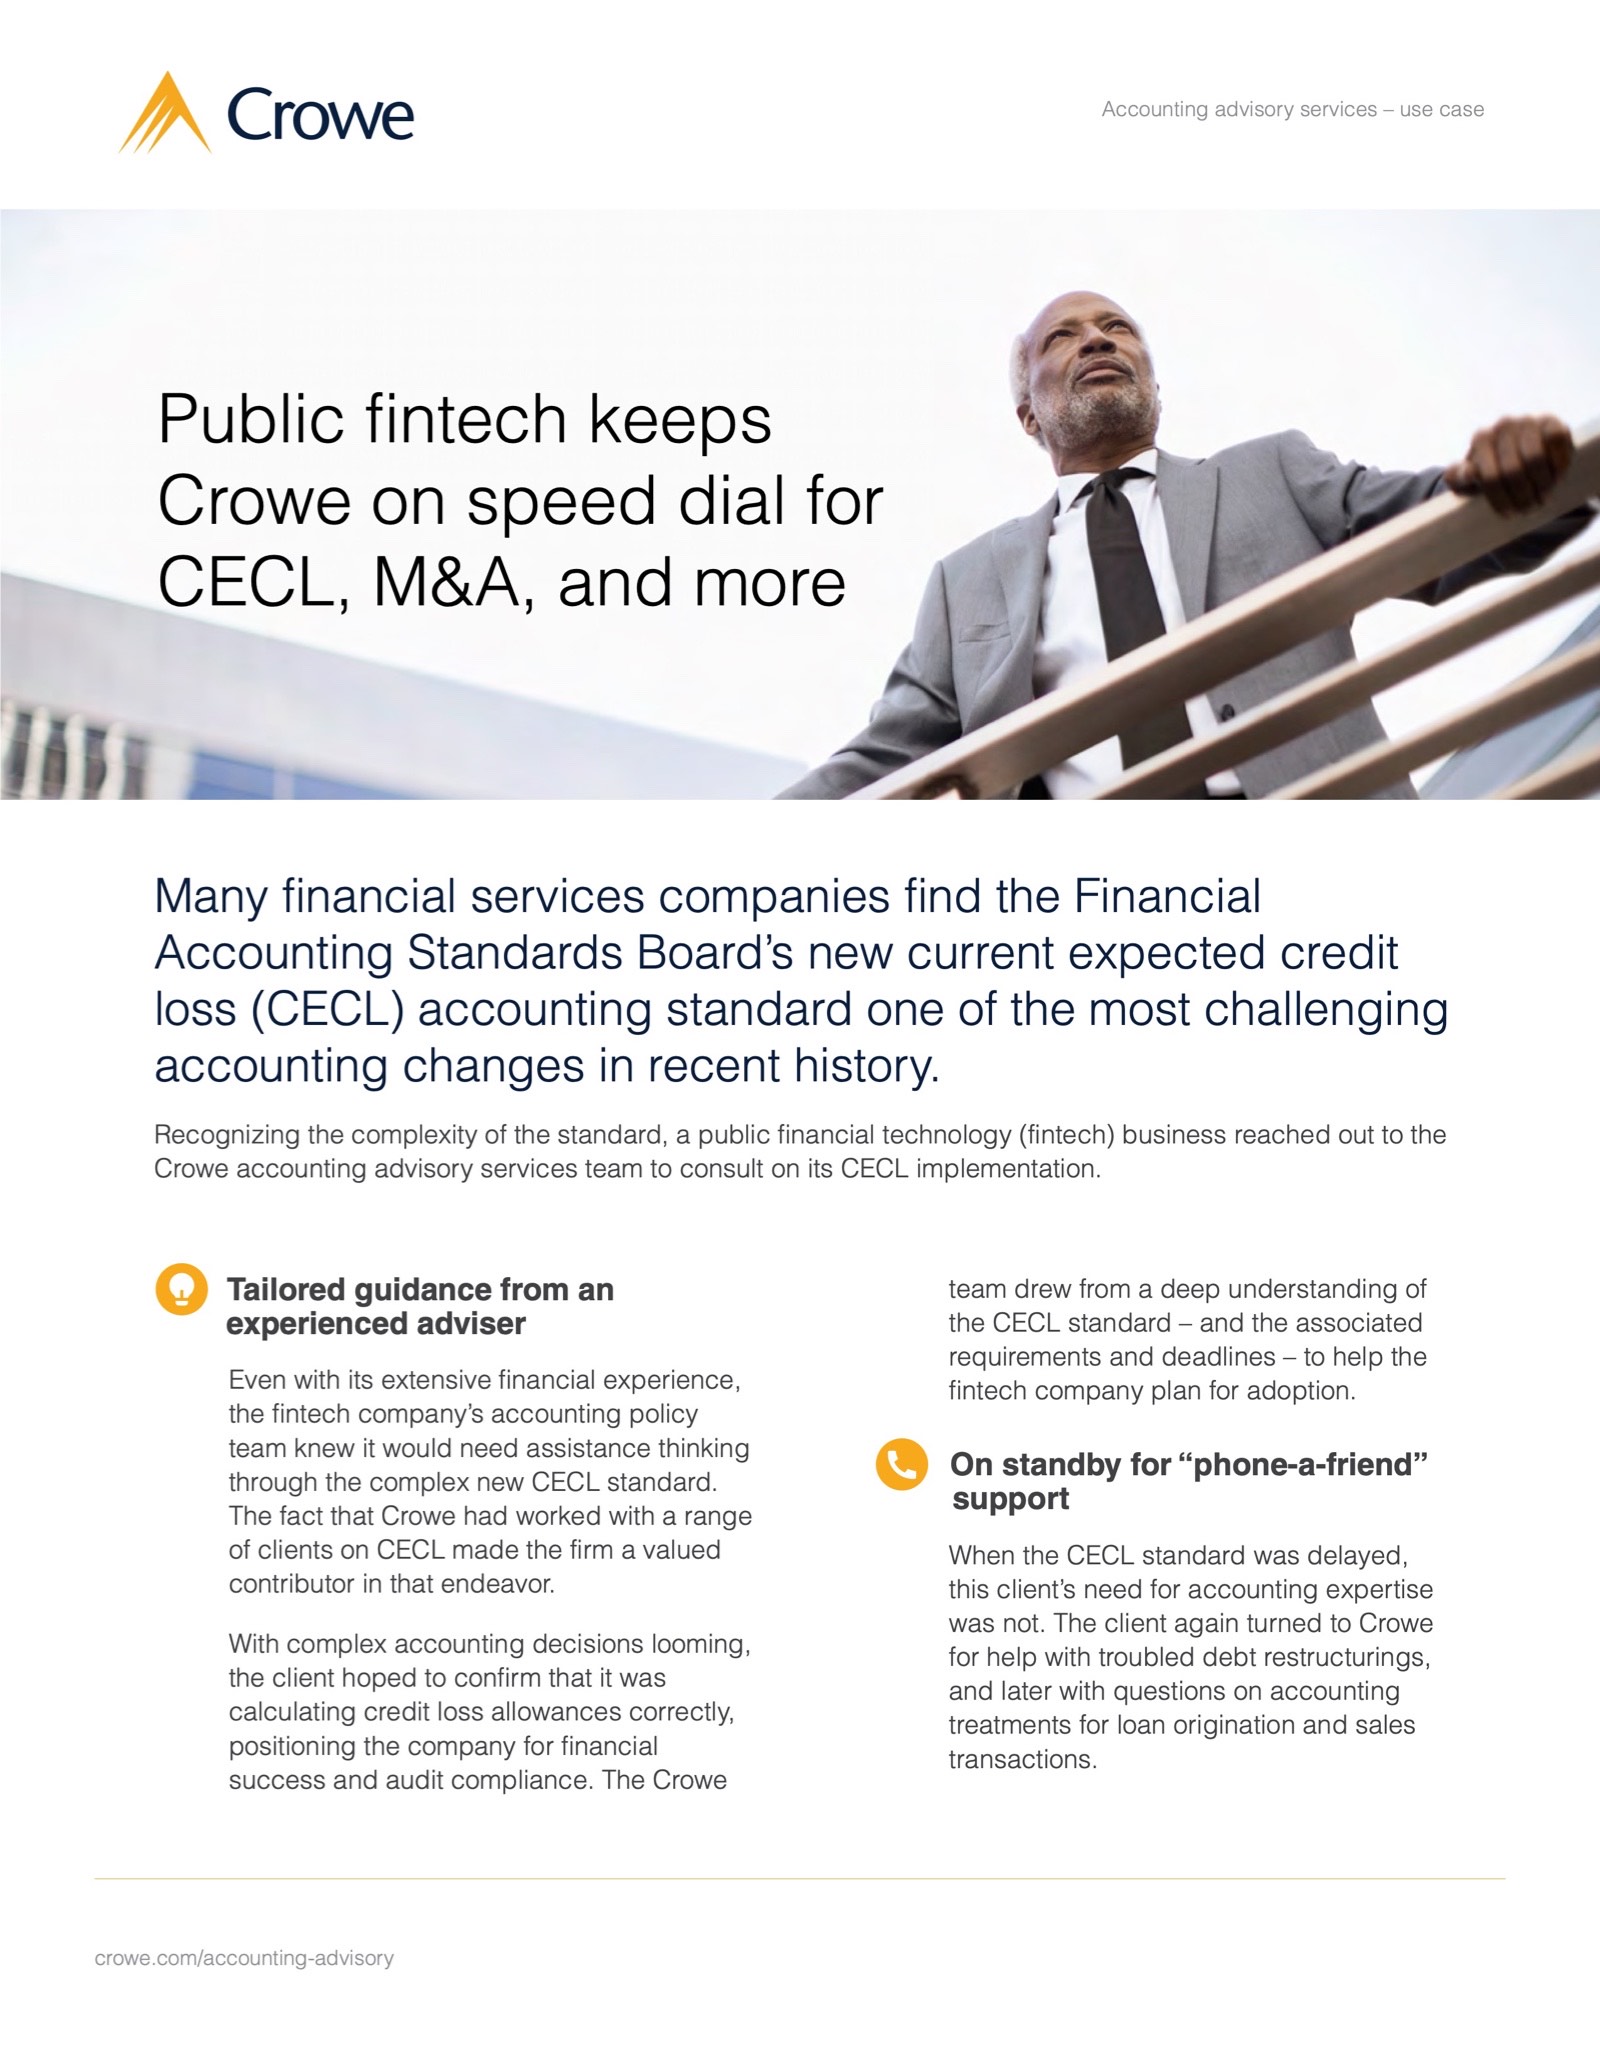 Public fintech keeps Crowe on speed dial for CECL, M&A, and more